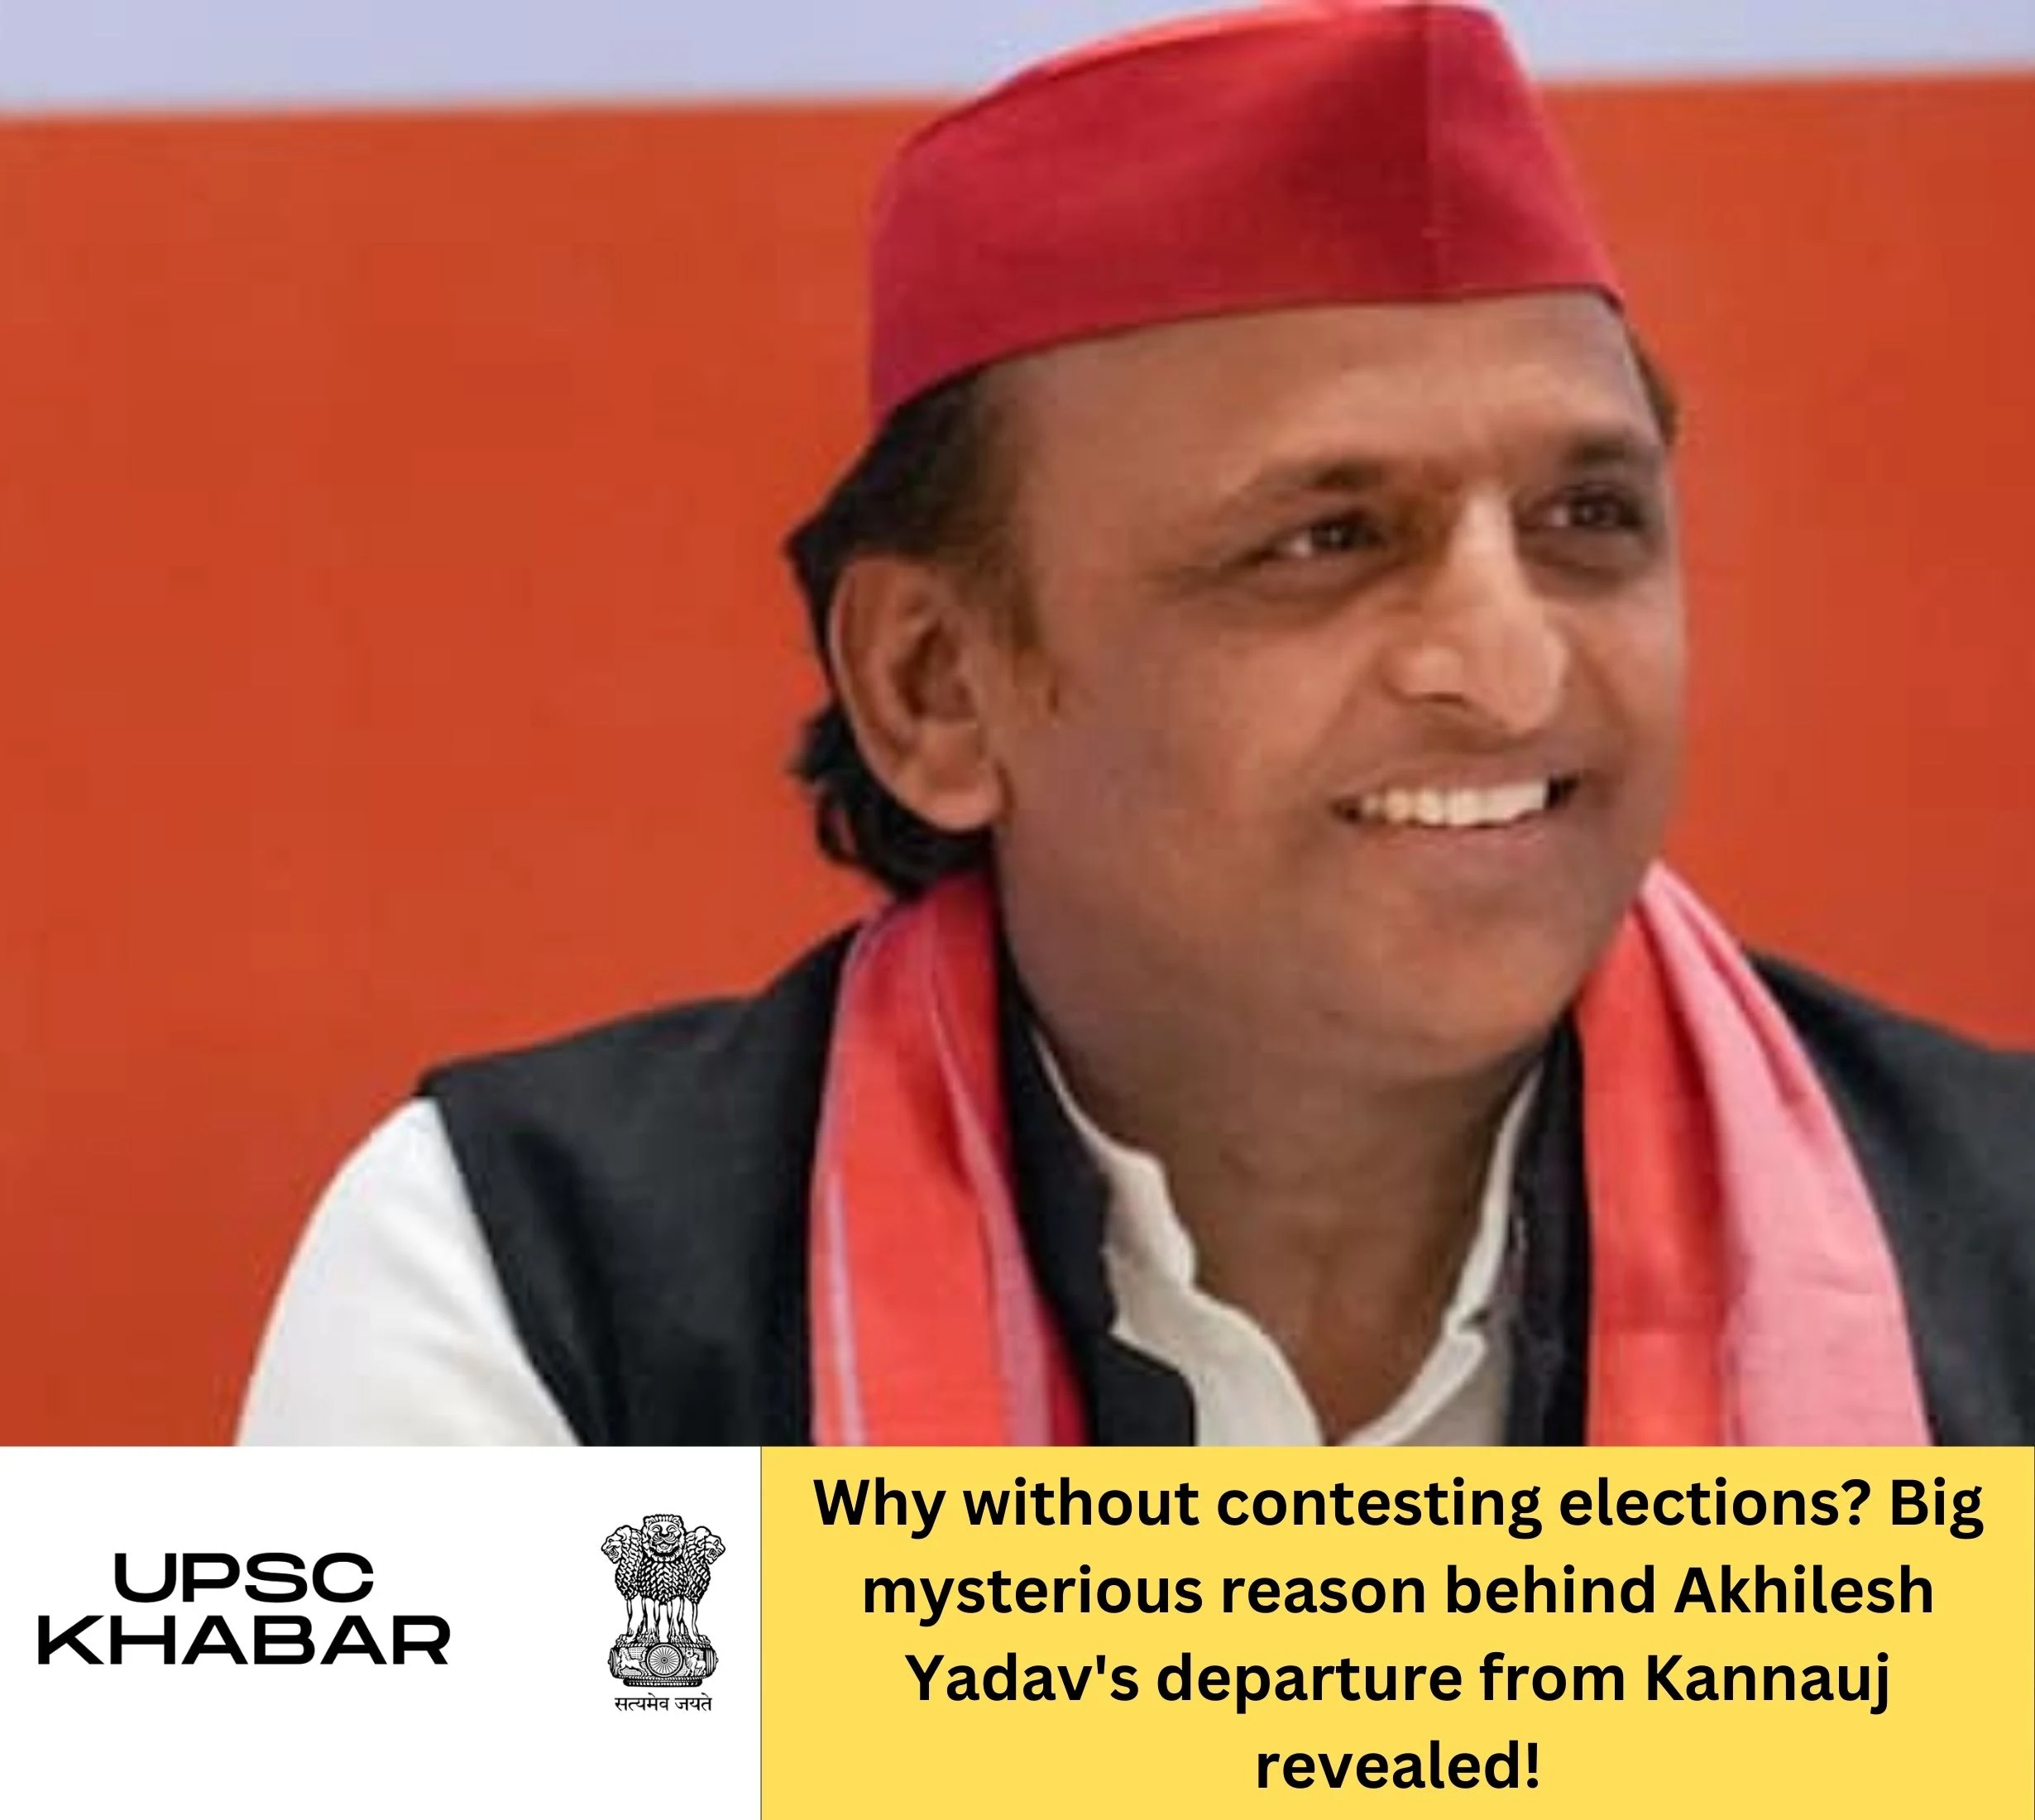 Why without contesting elections? Big mysterious reason behind Akhilesh Yadav's departure from Kannauj revealed!